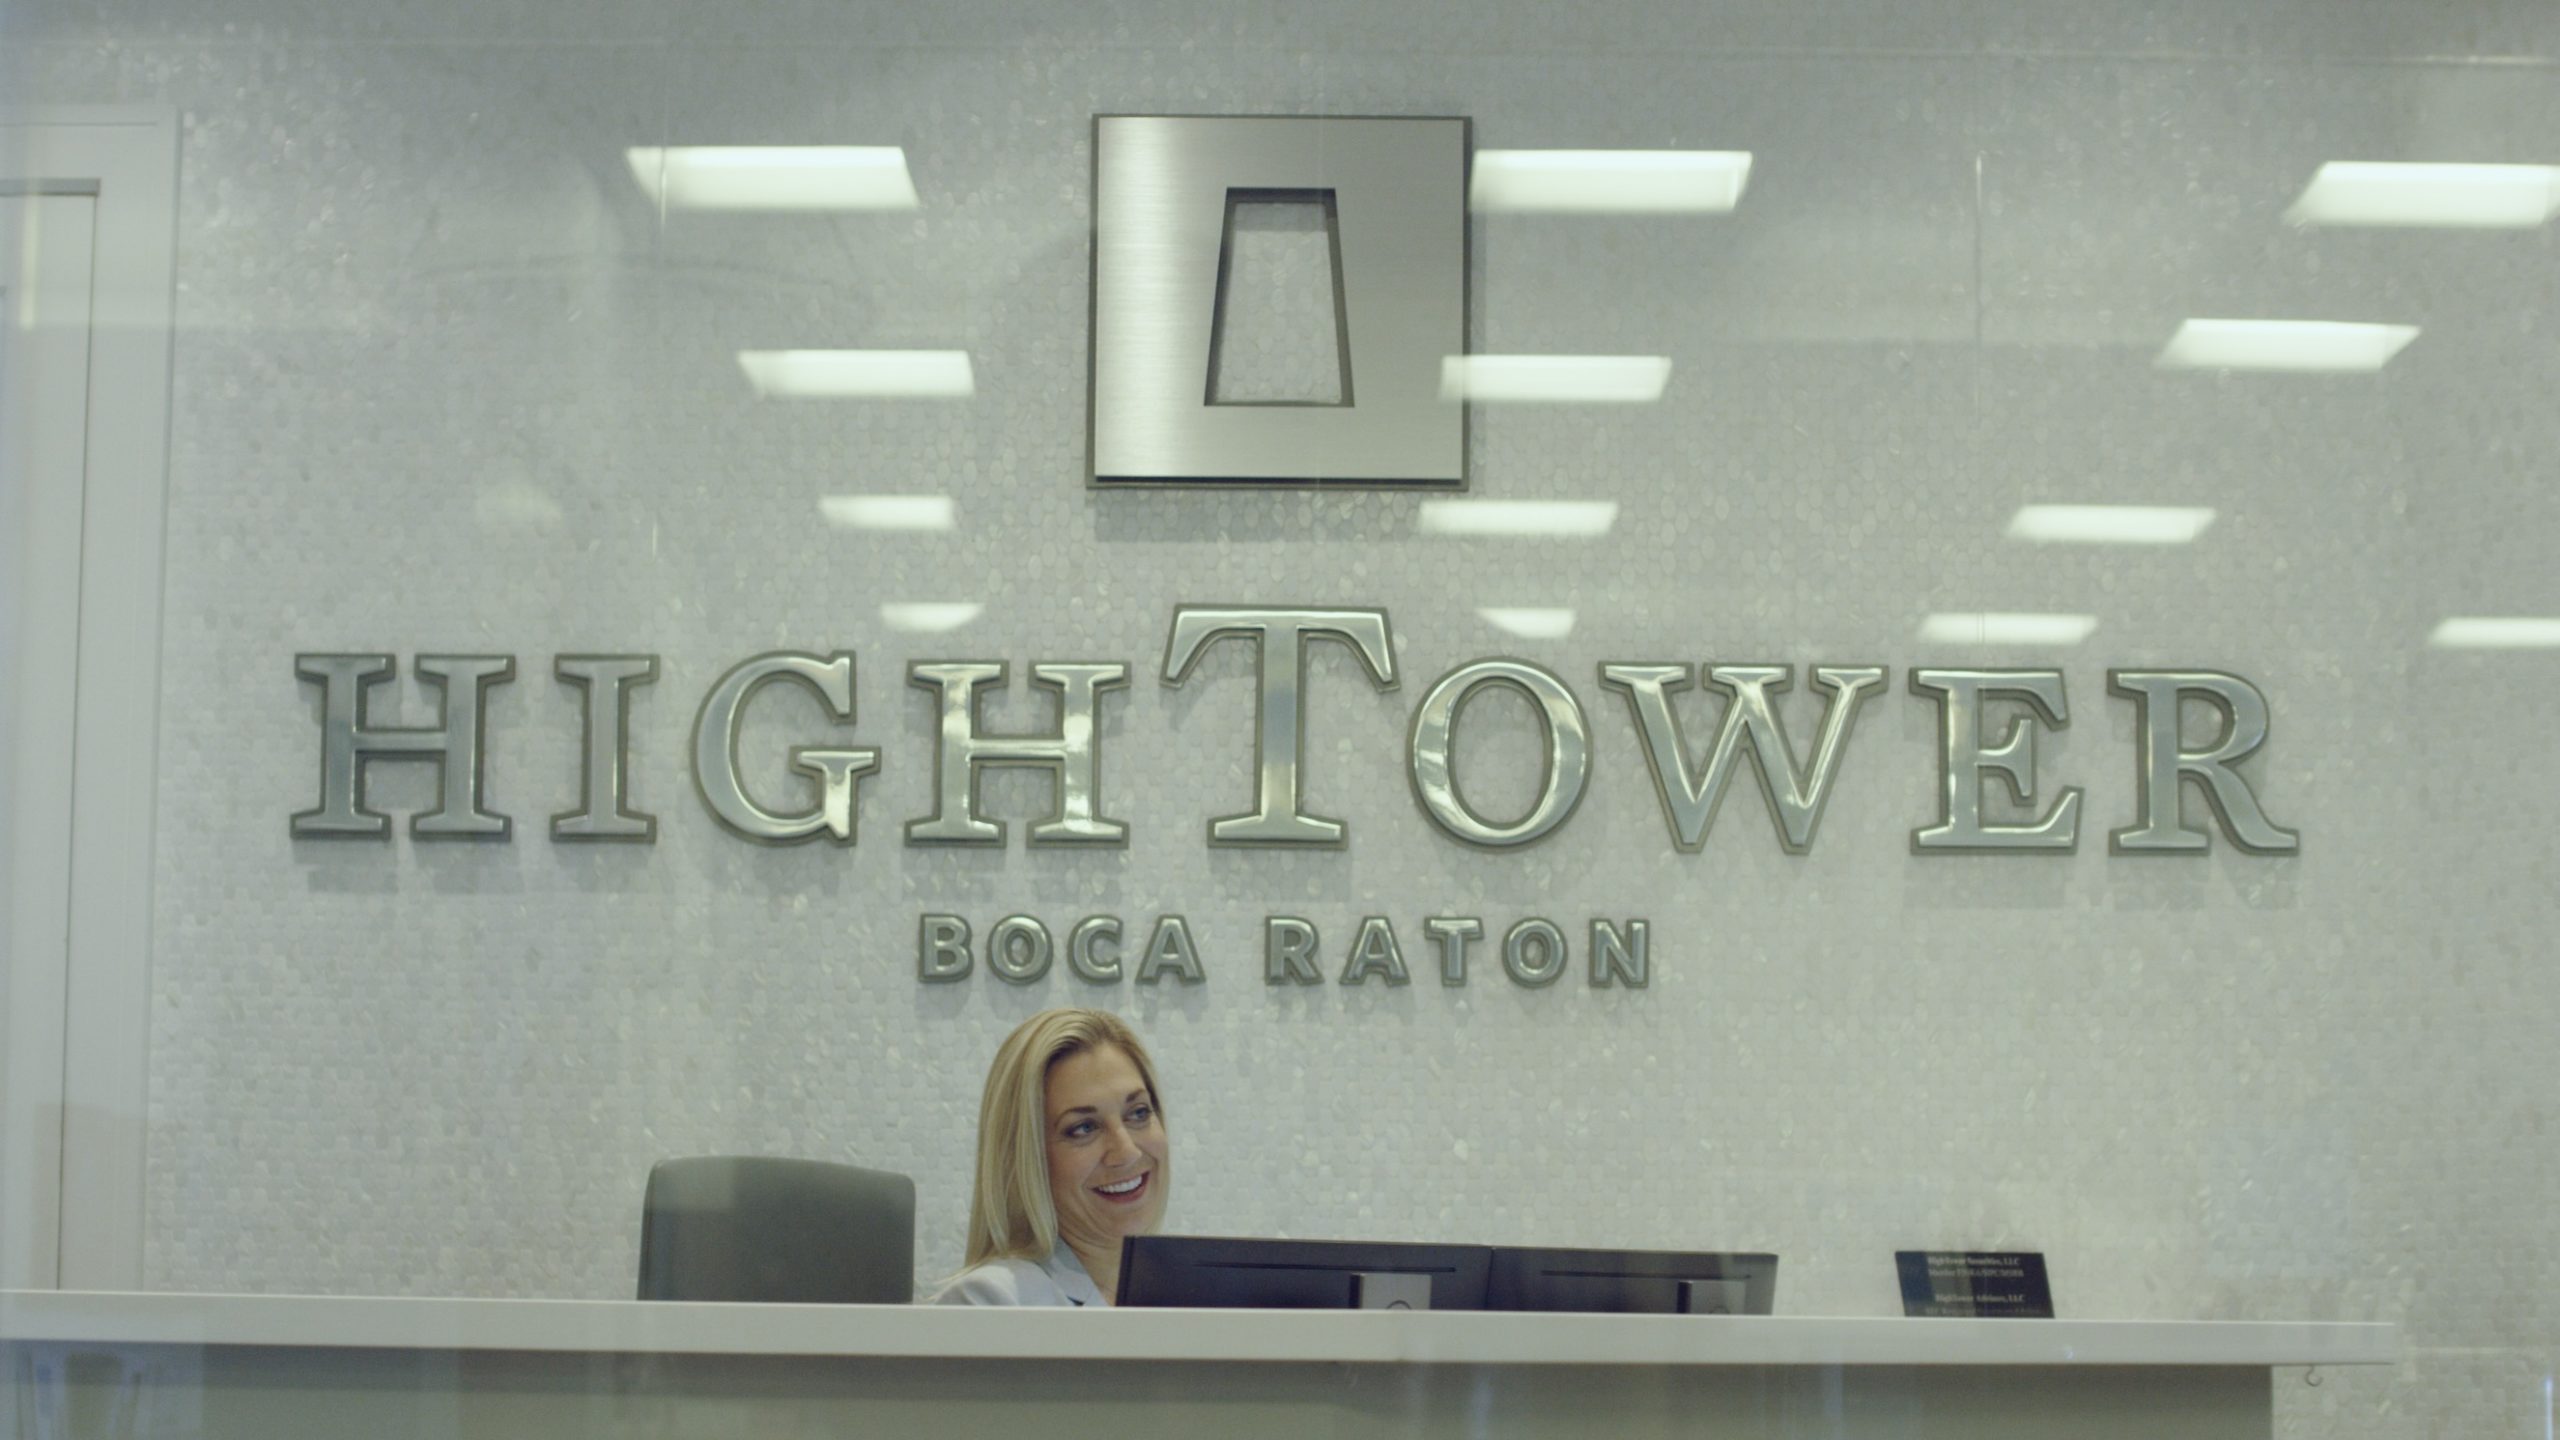 Hightower Financial Advisors Hightower Boca Raton logo in a lobby of the company with a secretary sitting at her desk smiling for the camera looking off to the side